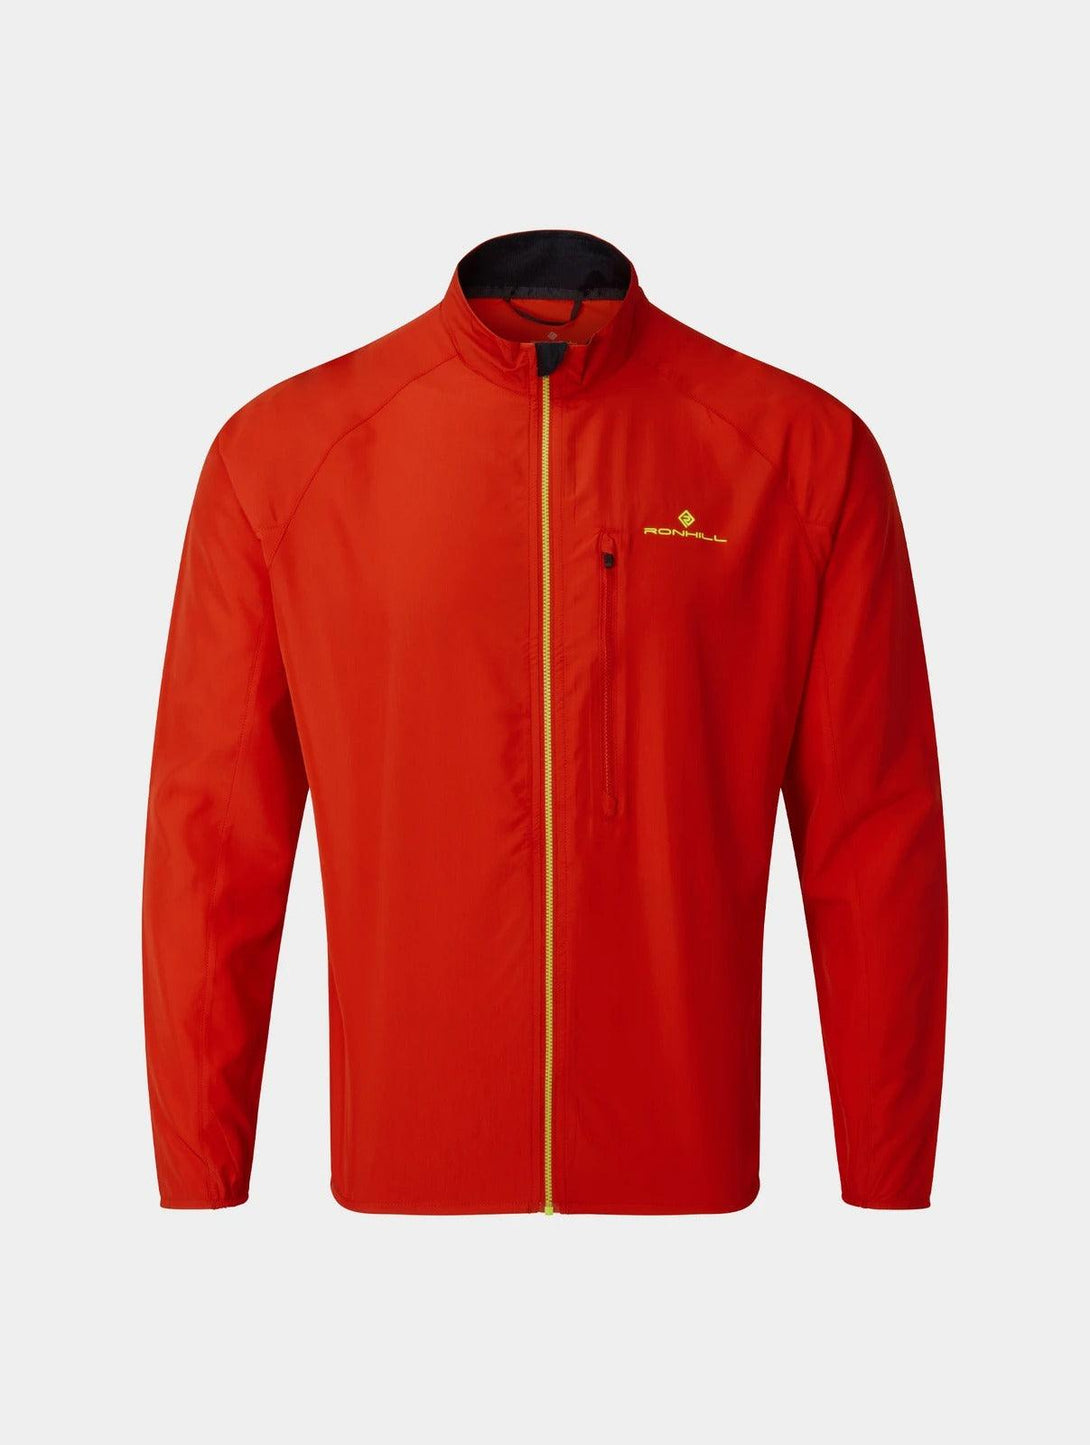 Ronhill Men's Core Jacket flame/fluo yellow